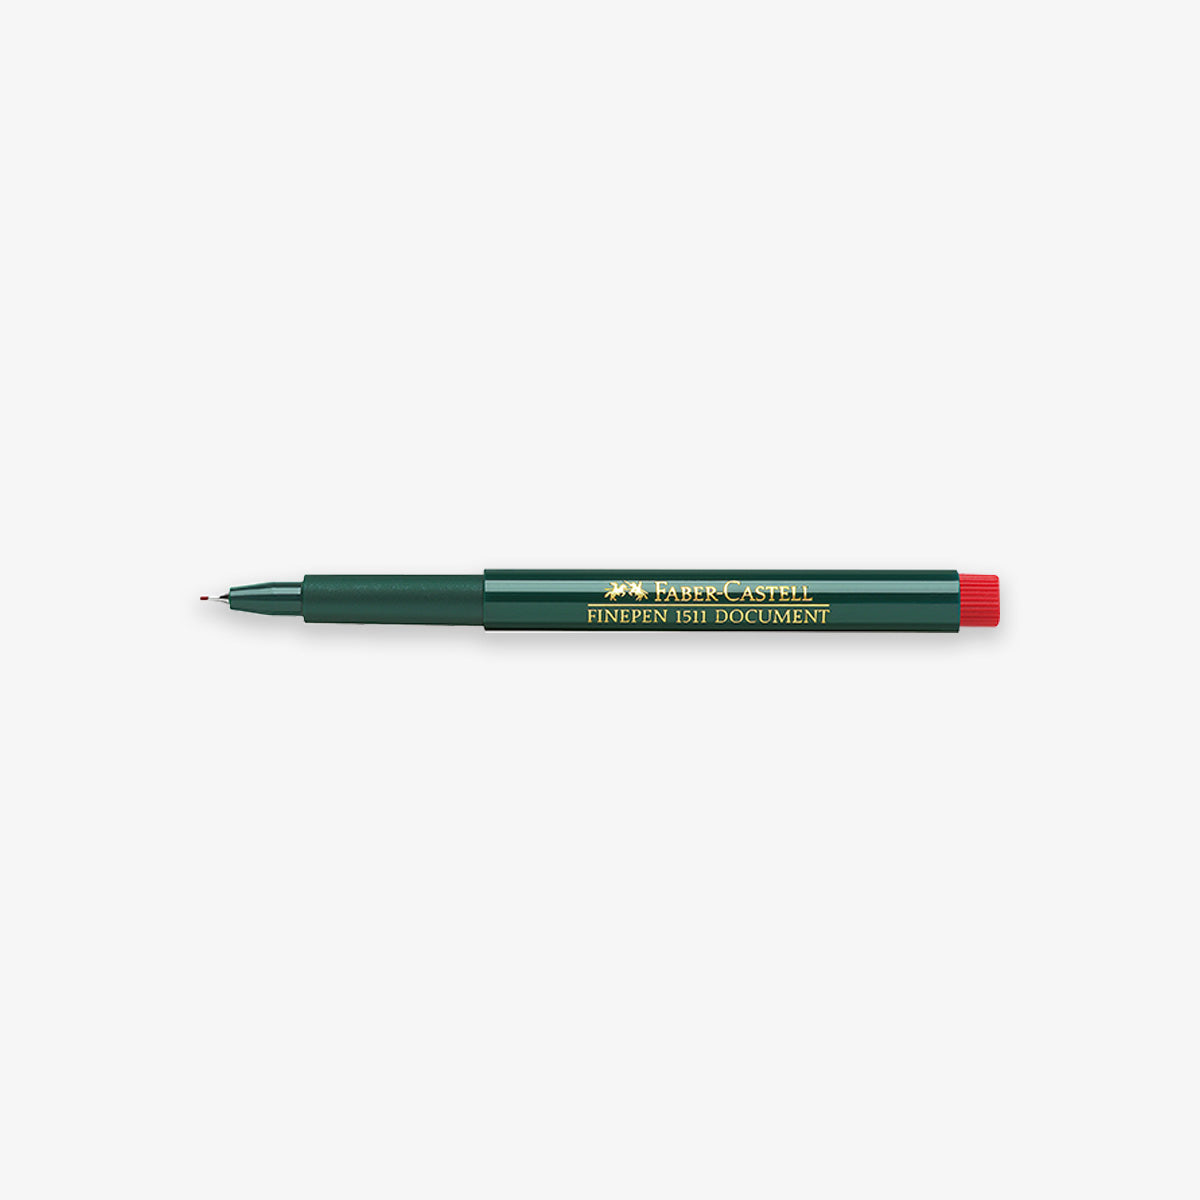 FINEPEN 1511 FINELINER 0.4 MM // RED